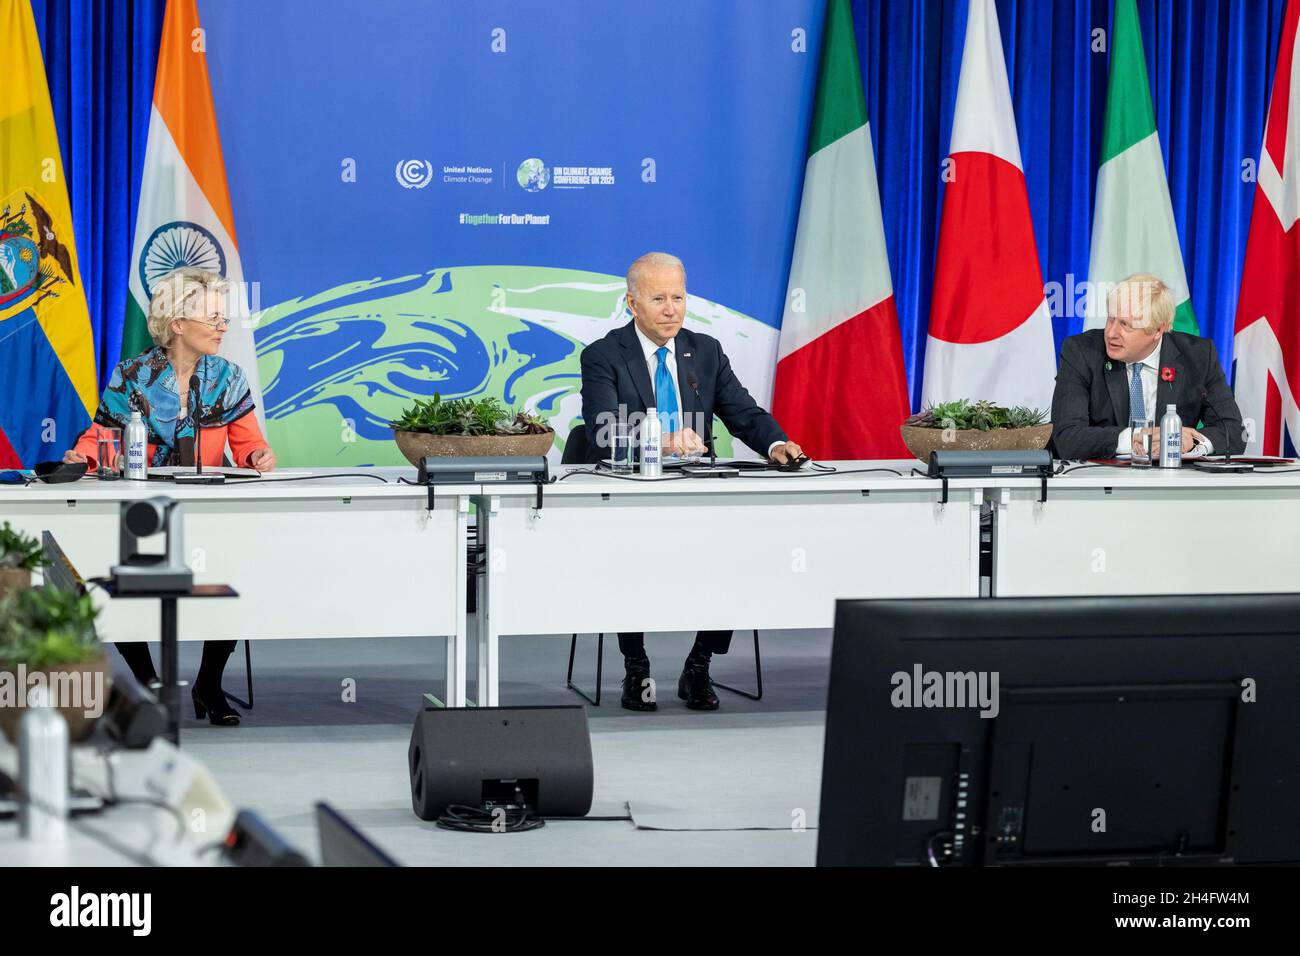 Glasgow, United Kingdom. 02nd Nov, 2021. U.S President Joe Biden with President of the European Union Commission Ursula von der Leyen, left, and British Prime Minister Boris Johnson, right, during a breakout session on the second day of the COP26 U.N. Climate Summit at the Glasgow Science Centre November 2, 2021 in Glasgow, Scotland.Credit: Adam Schultz/White House Photo/Alamy Live News Stock Photo